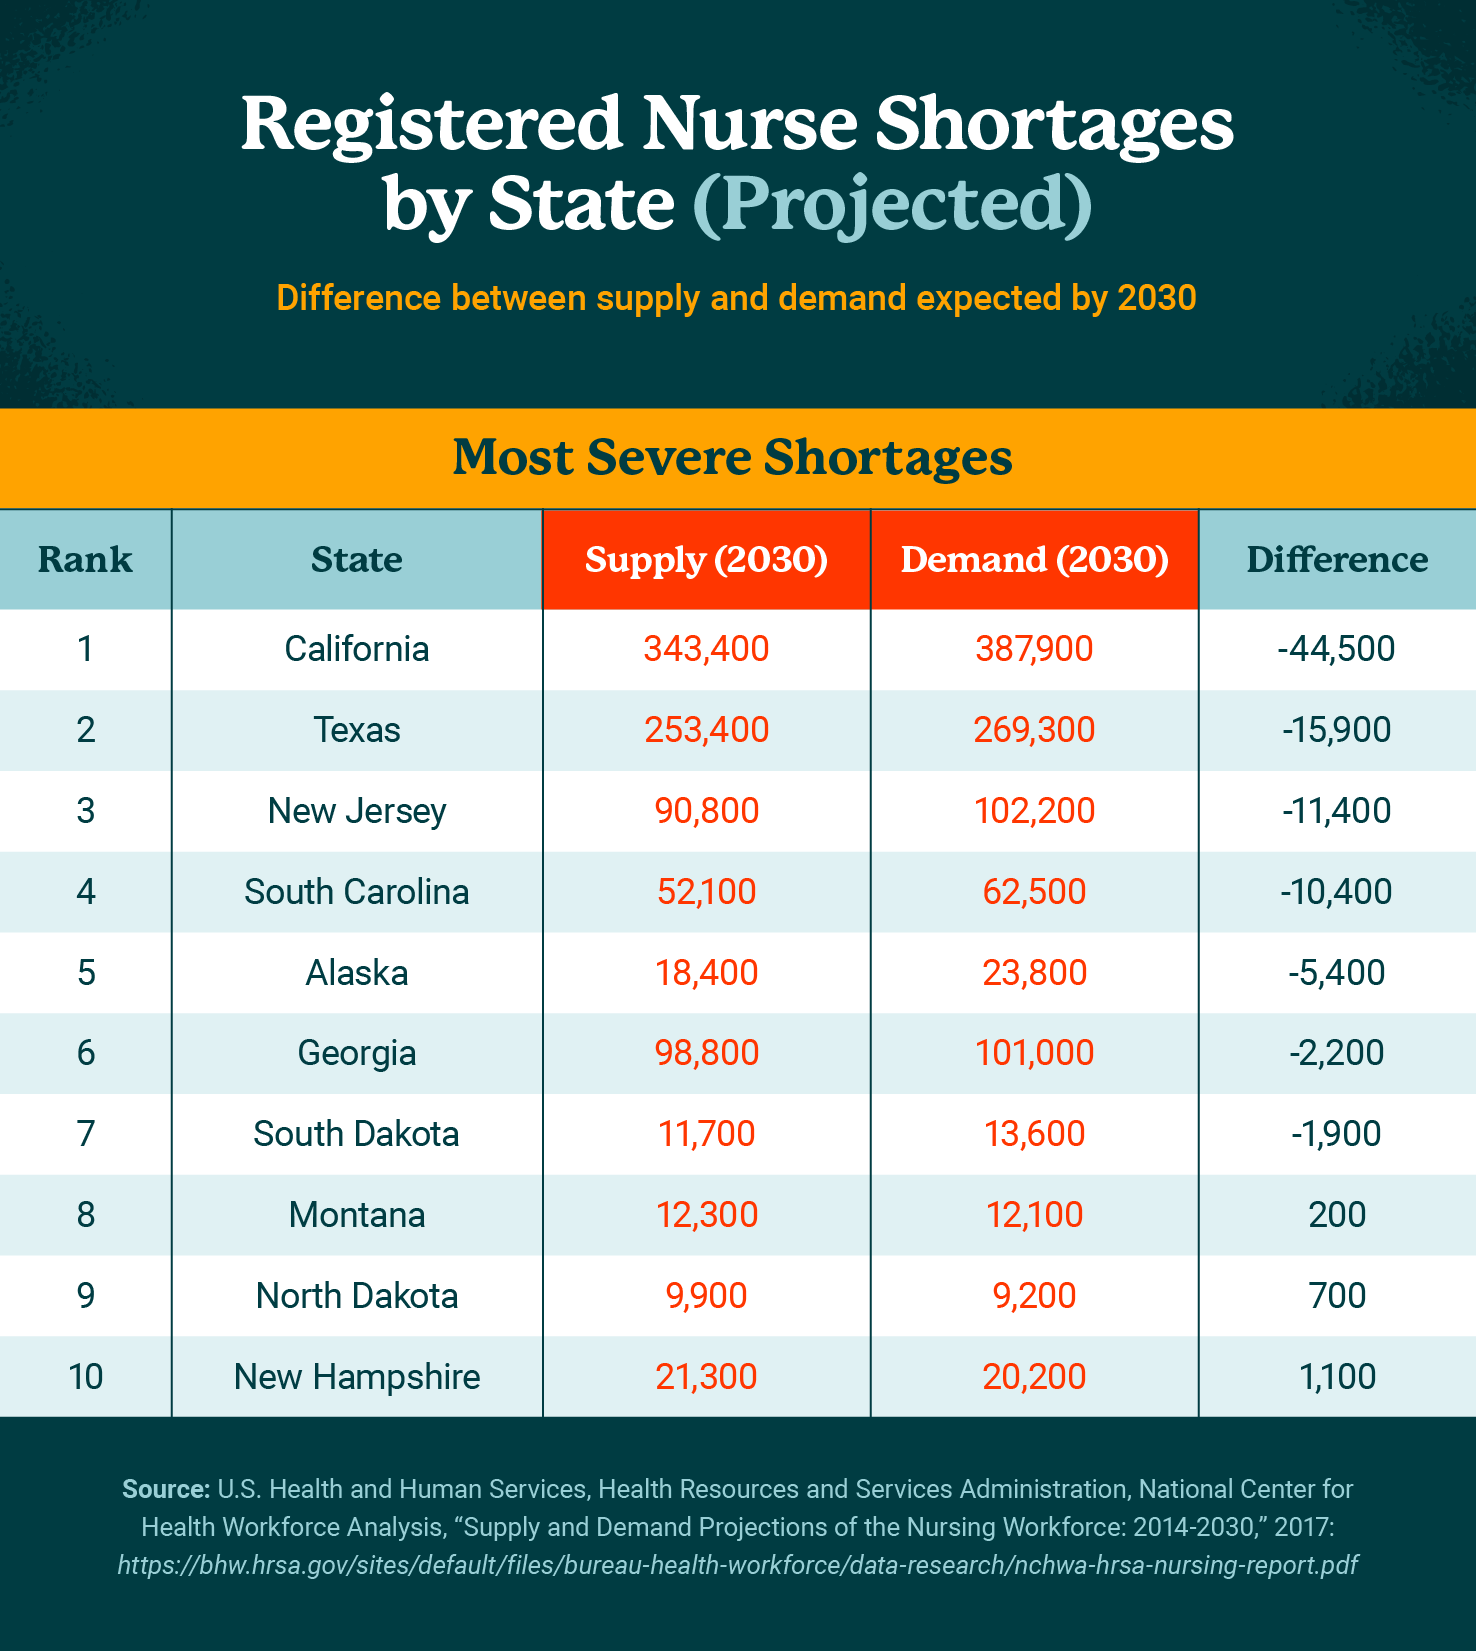 Registered Nurses Shortages by State graphic